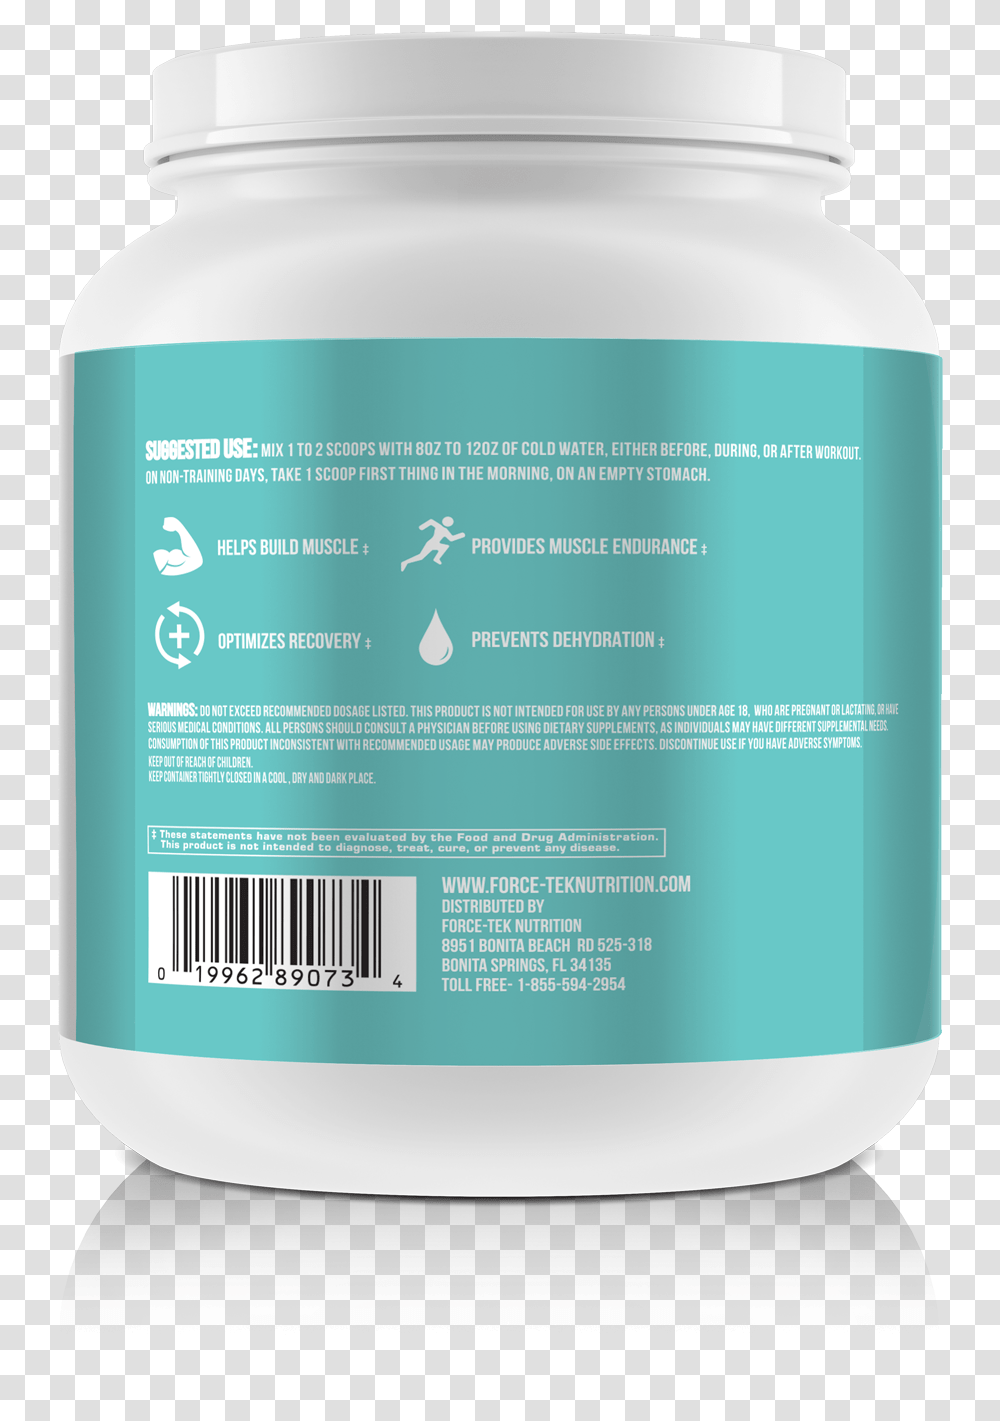 Bcaa LabelClass Lazy Cosmetics, Bottle, Shampoo, Aftershave, Deodorant Transparent Png